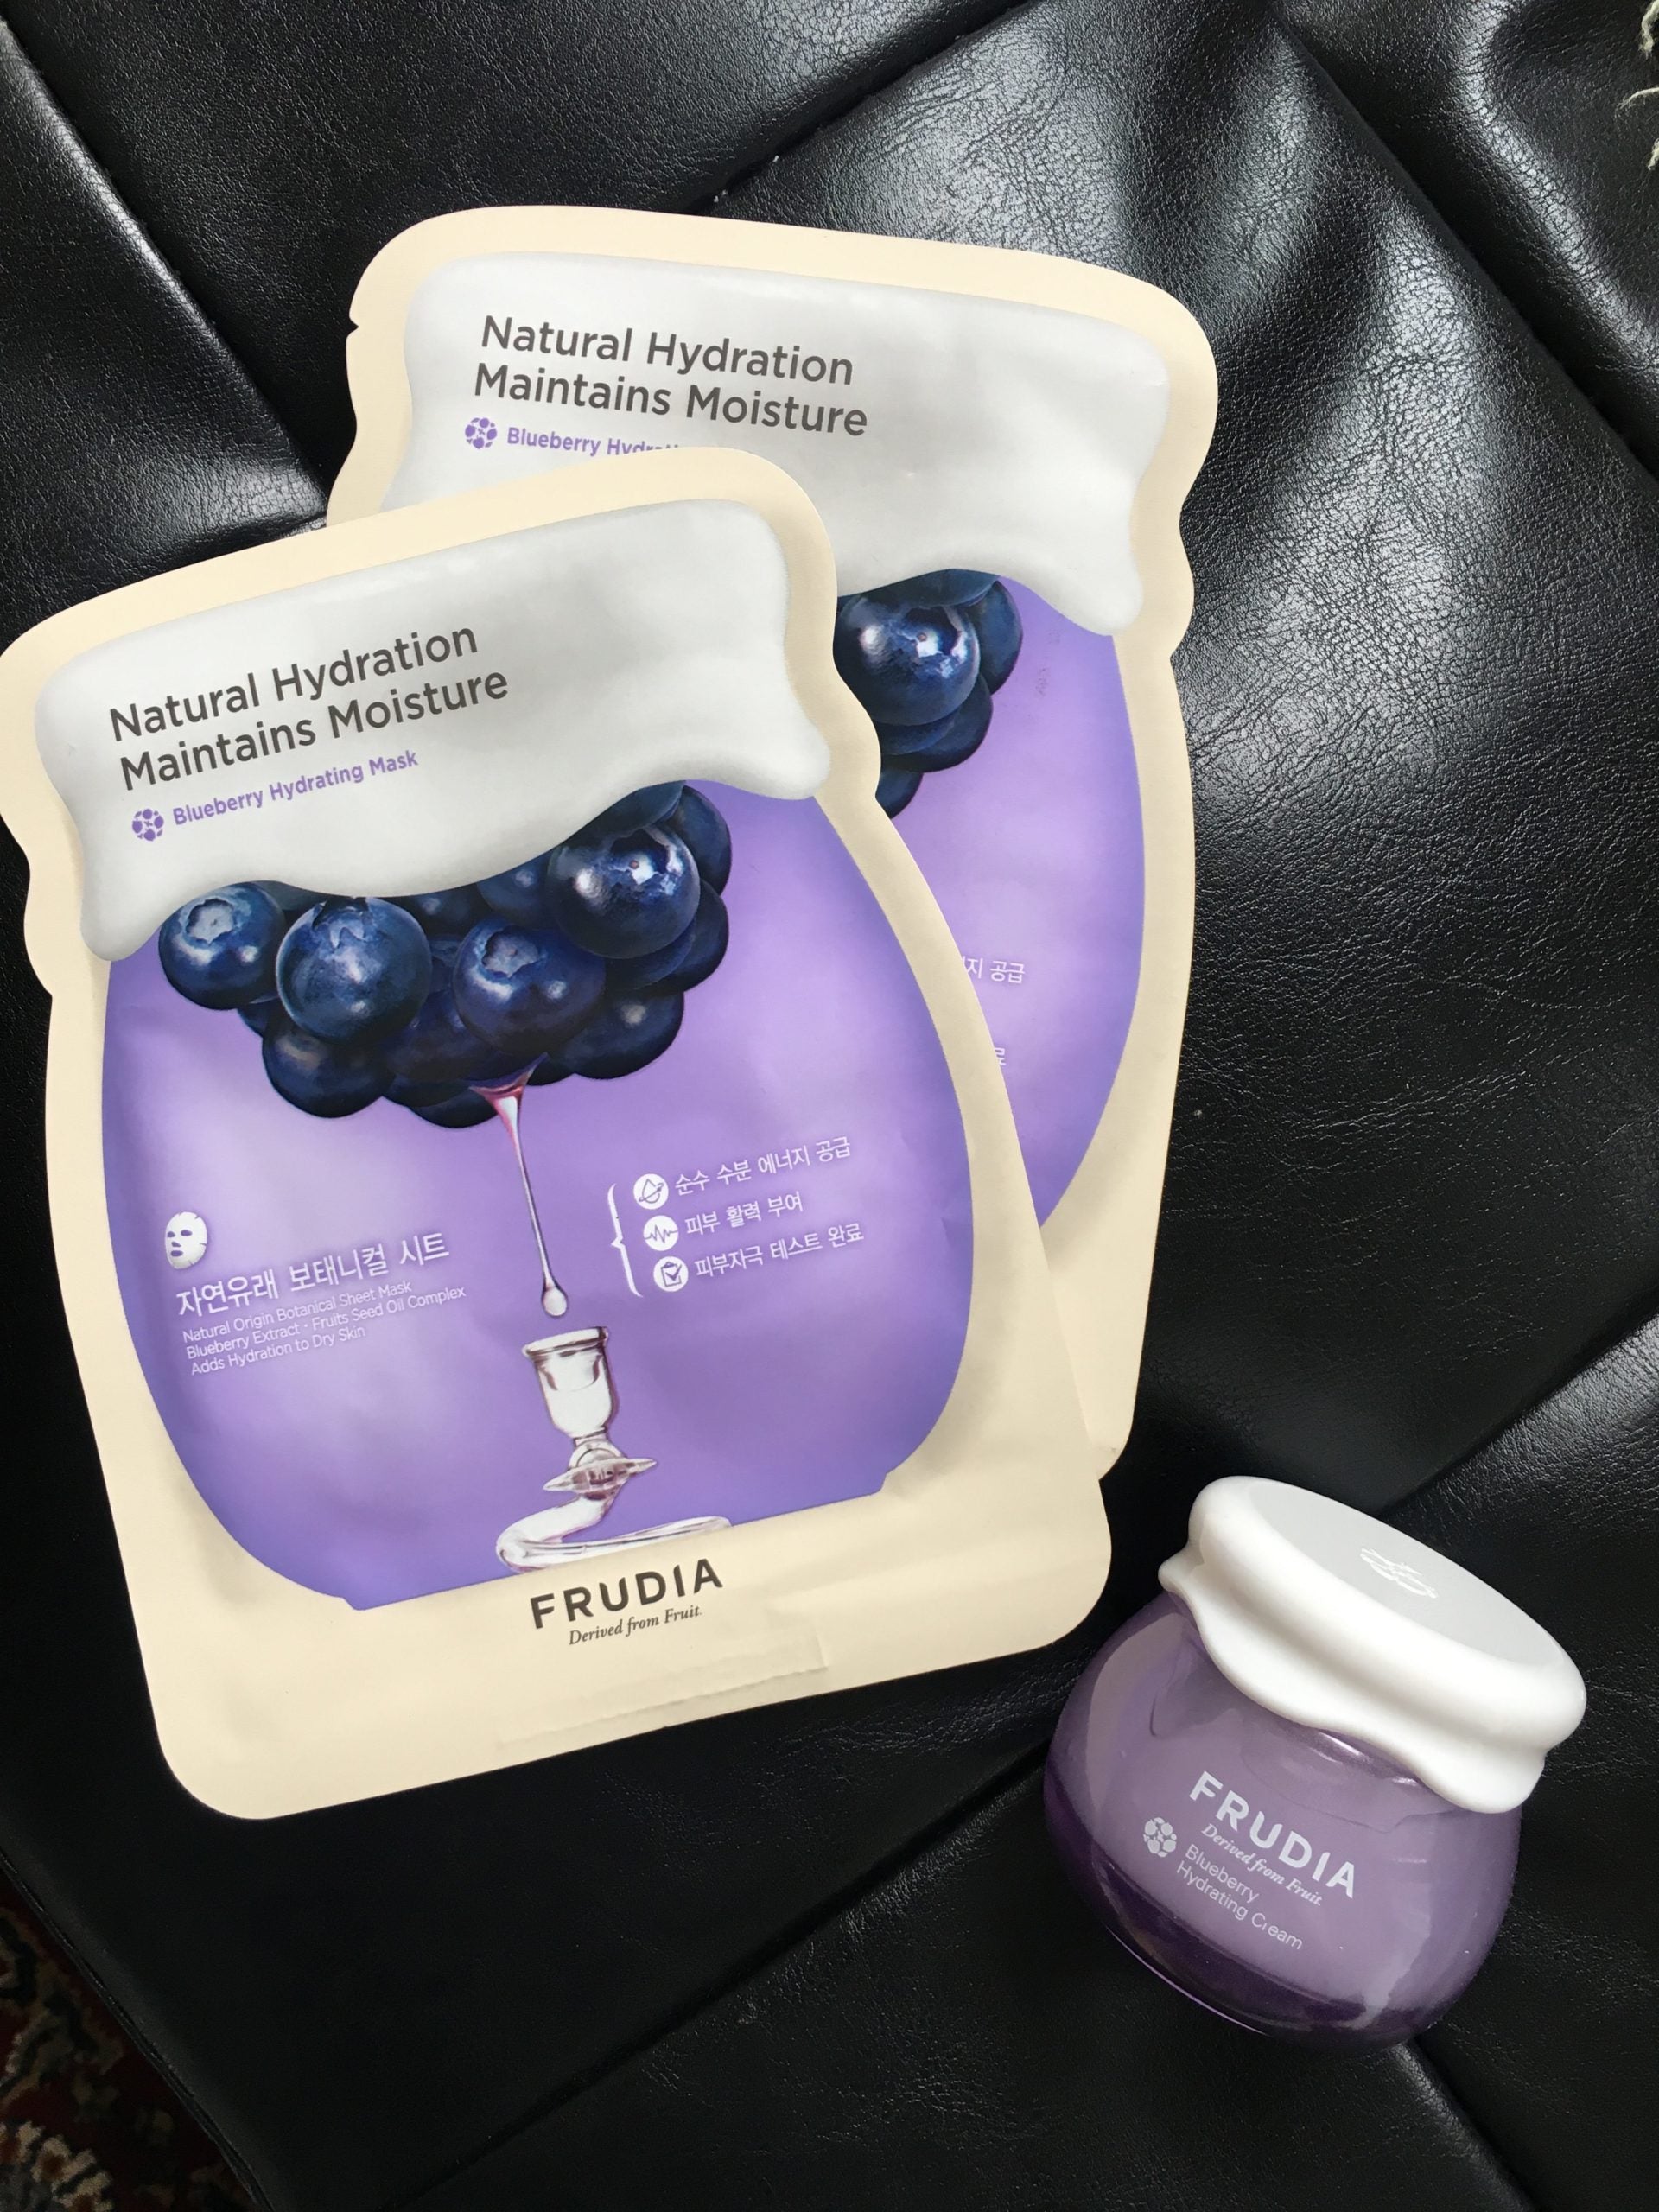 Review, Ingredients, Photos, Swatches, Skincare Trend 2018, 2019, 2020: Best Hydrating Products, K-Beauty, Frudia, Blueberry Hydrating Sheet Mask, Hydrating Cream